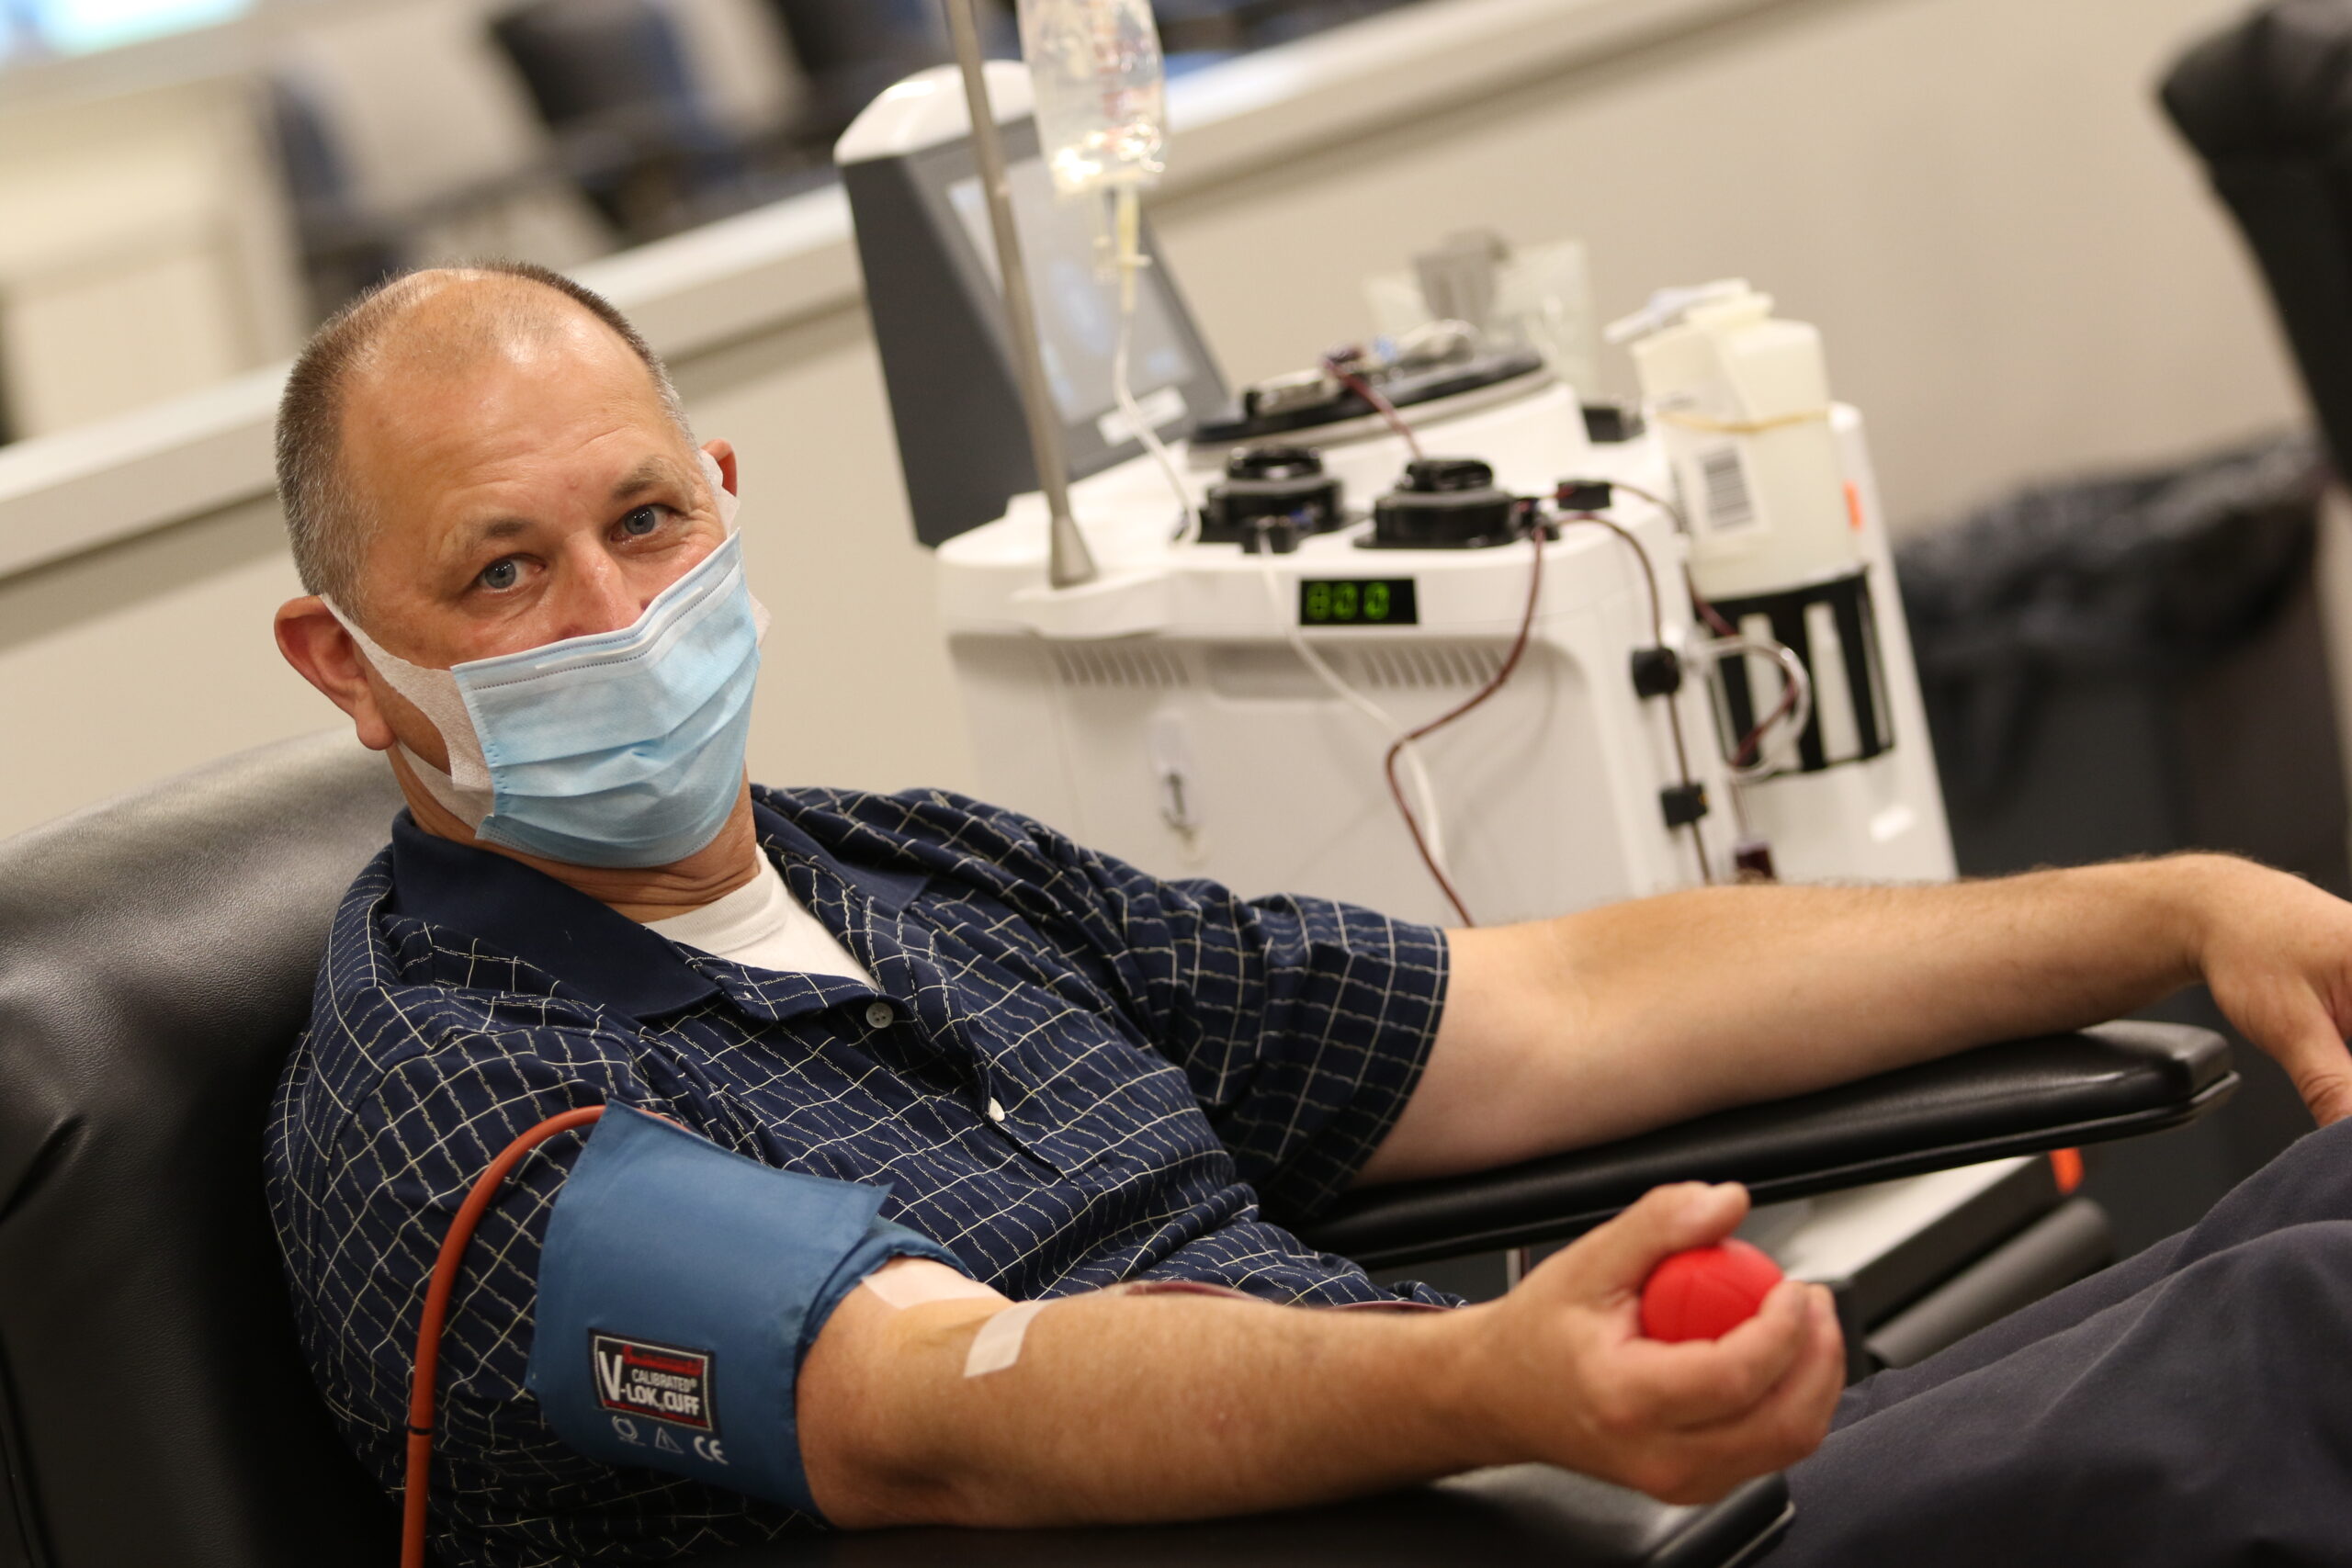 A Family Donating Plasma to Save Lives